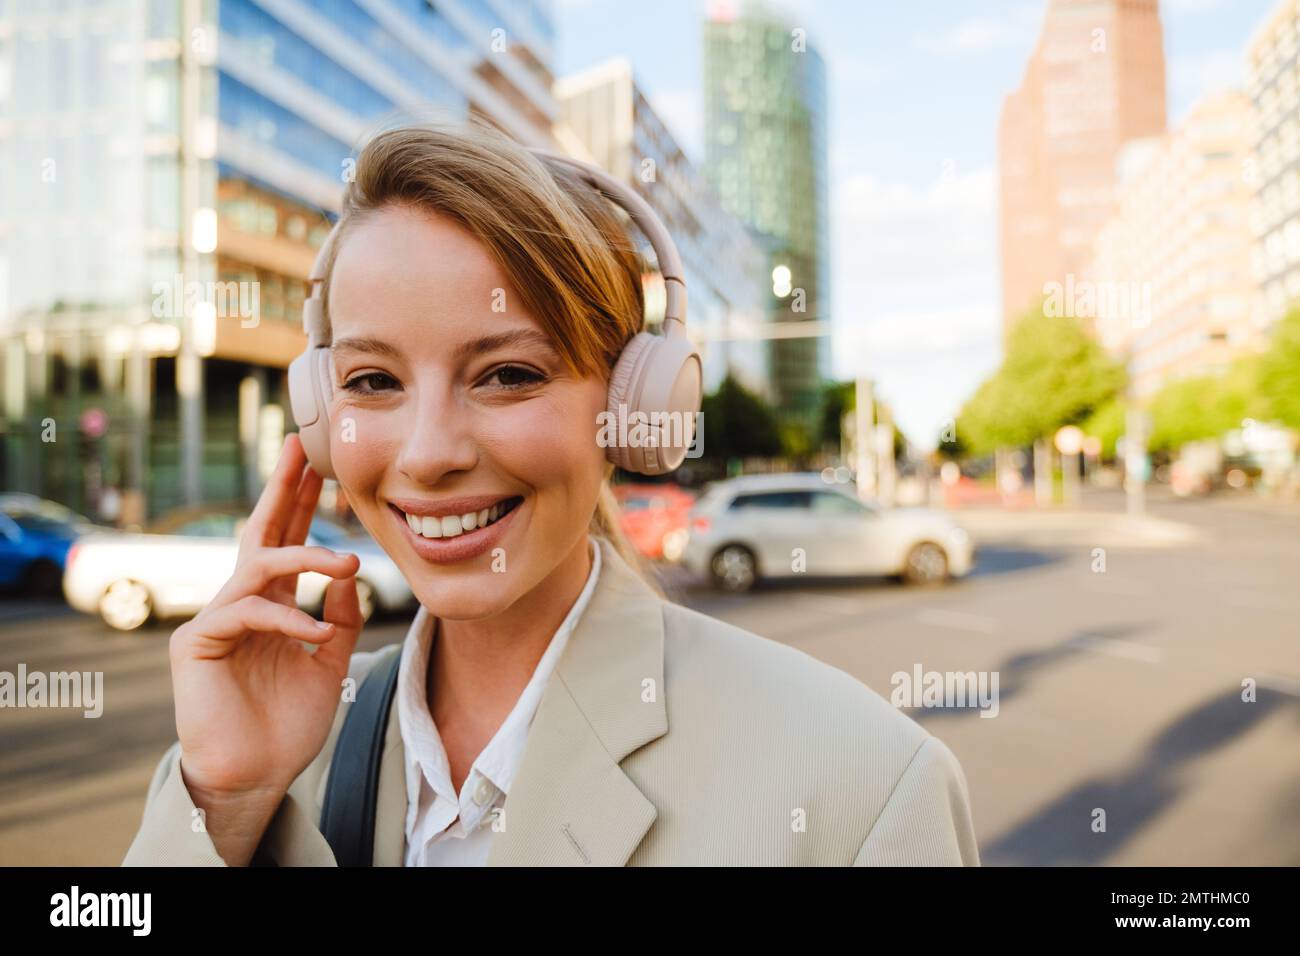 Young white woman smiling and using headphones while walking on city street Stock Photo